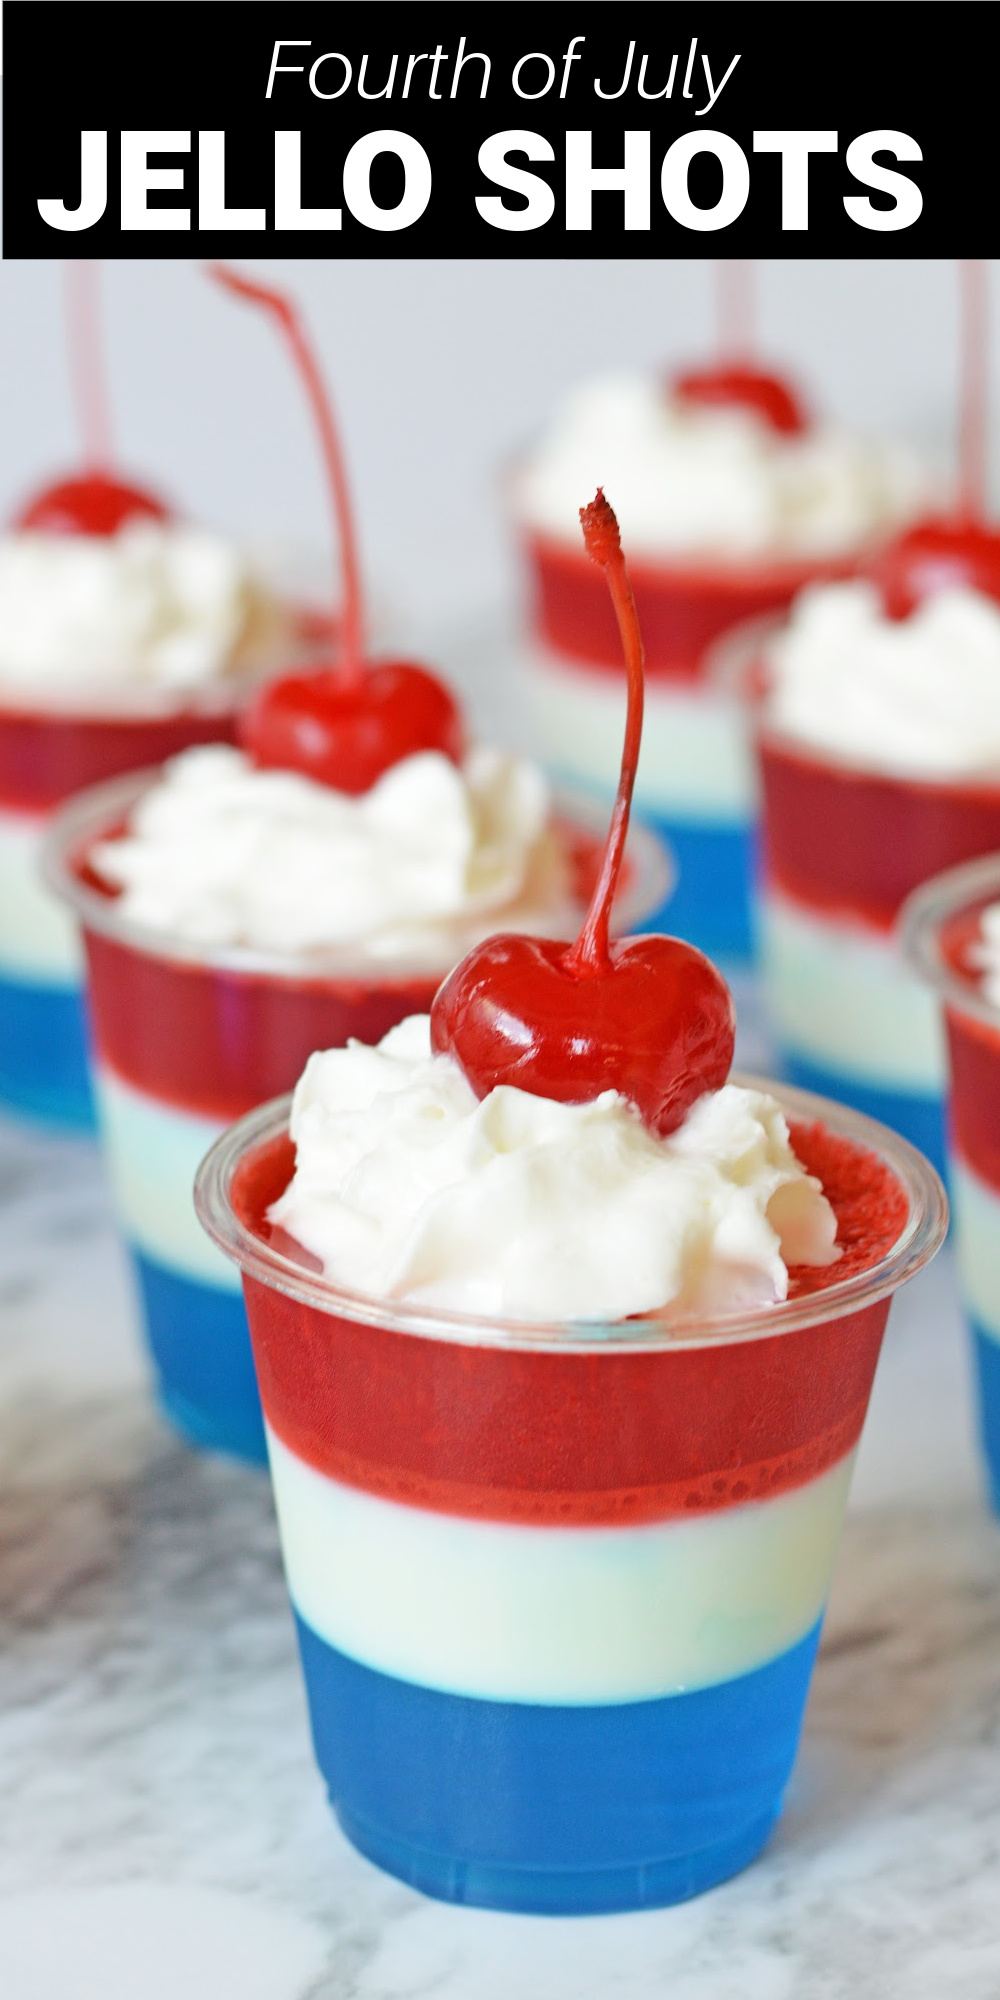 4th of July jello shots recipe is a fun and colorful way for adults to splurge a little during all your summertime celebrations. Made with berry jello, sweetened condensed milk, and cherry jello you can make these with or without alcohol.